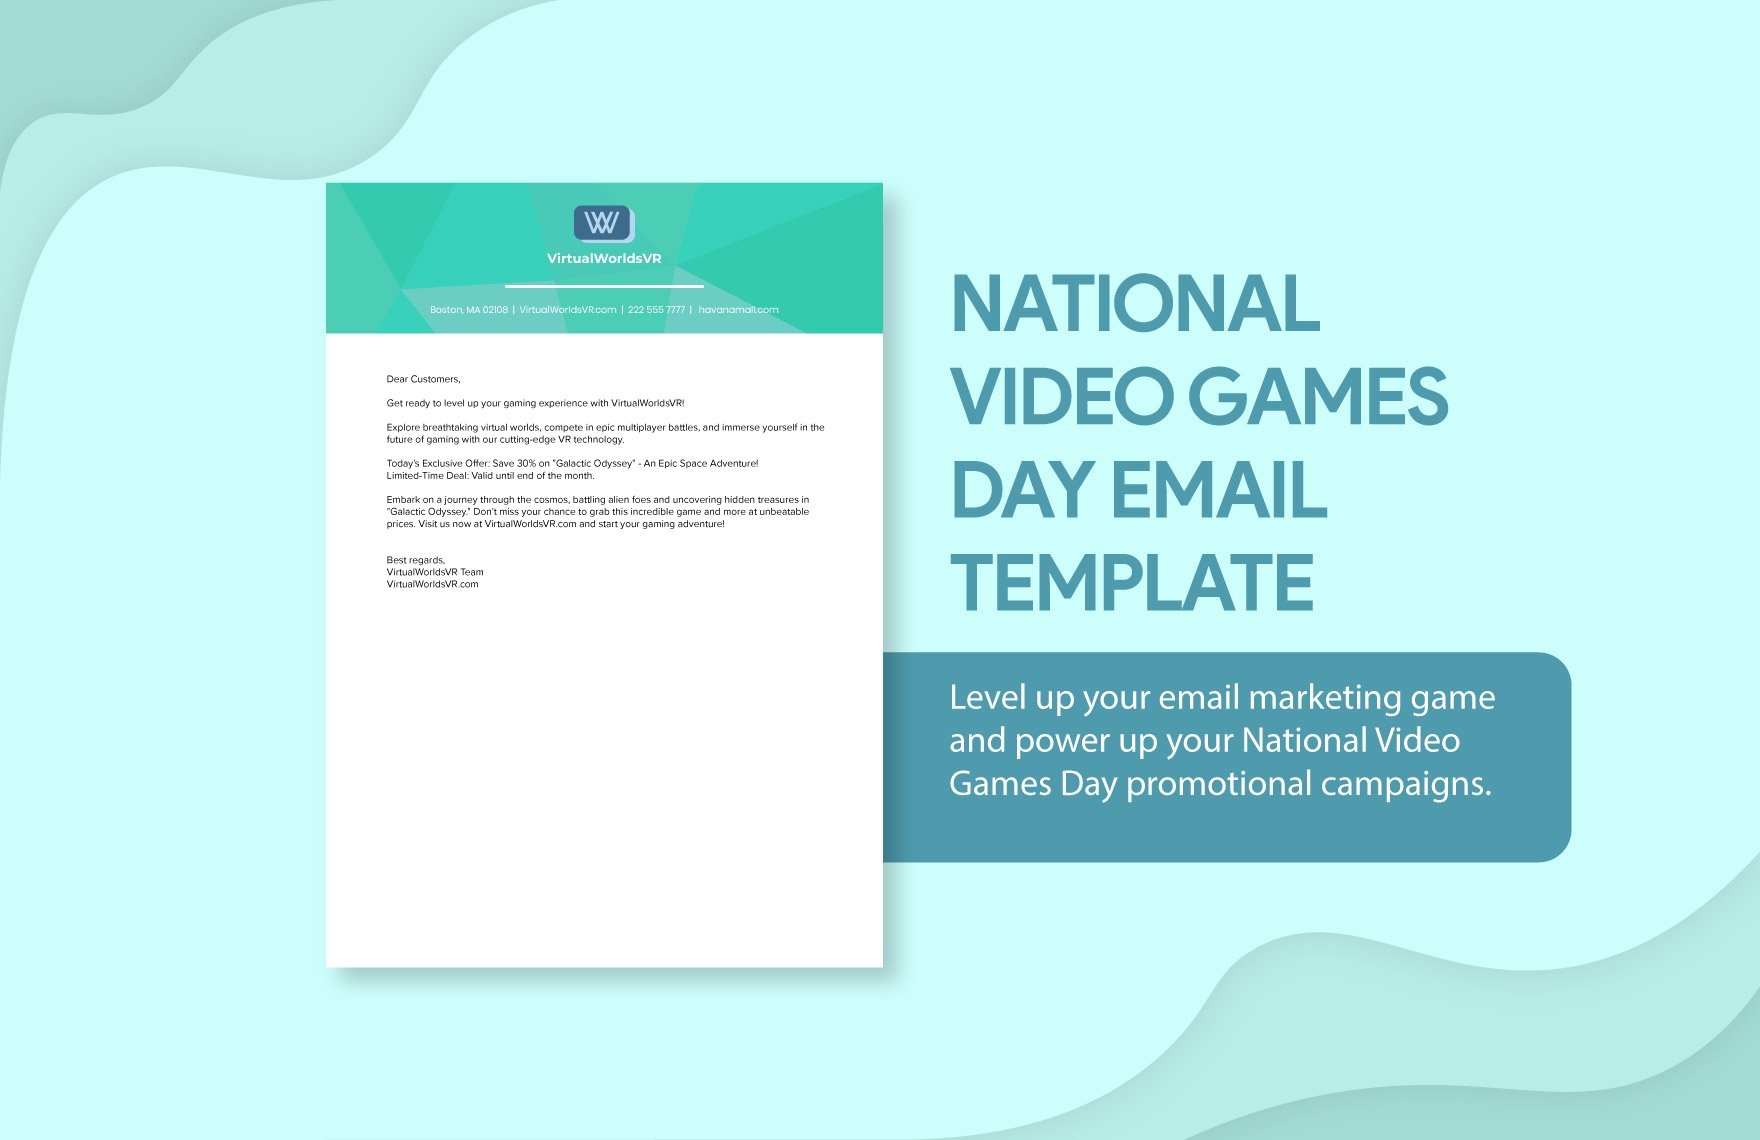 National Video Games Day Email Template in Word, Google Docs, PDF